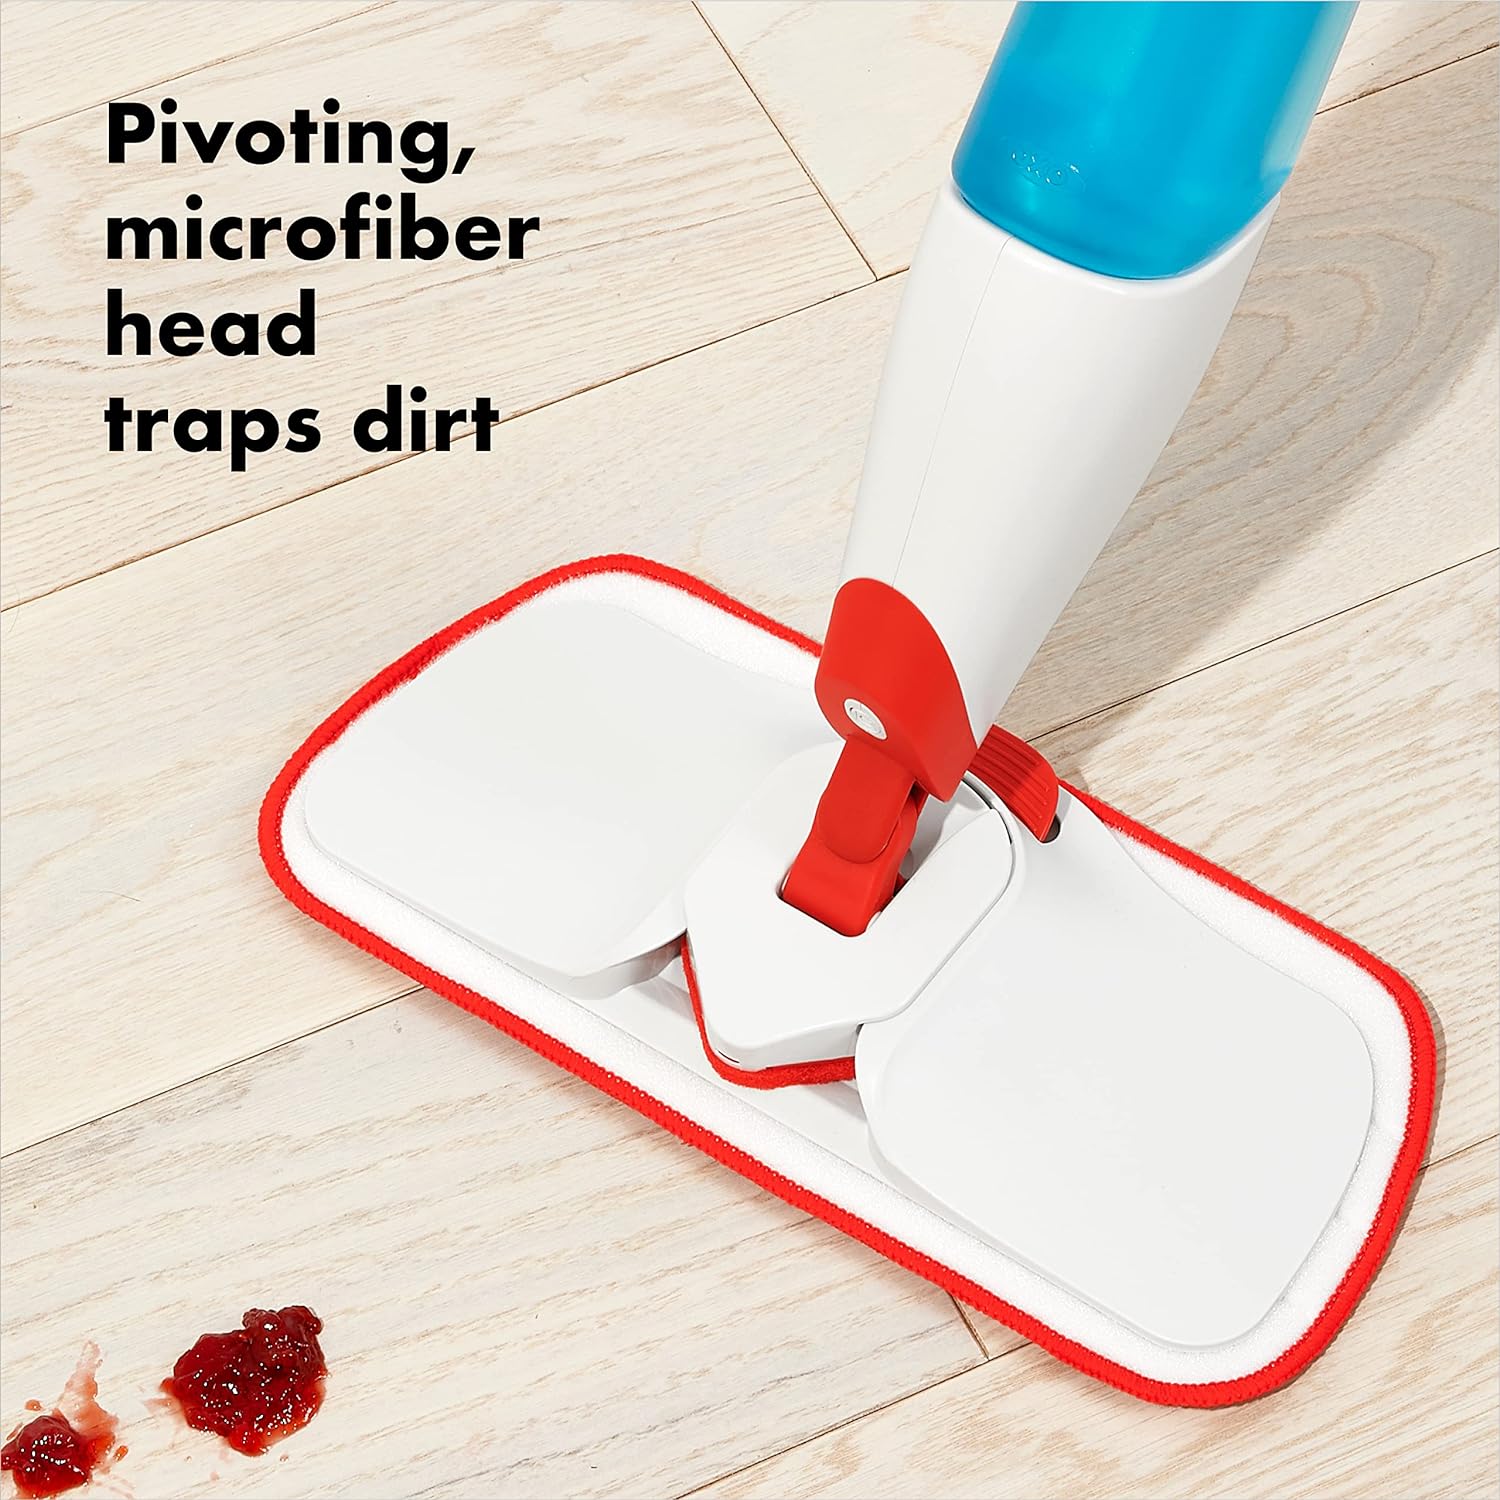 OXO Good Grips Microfiber Spray Mop with Slide-Out Scrubber - Upper East Side Delivery Only